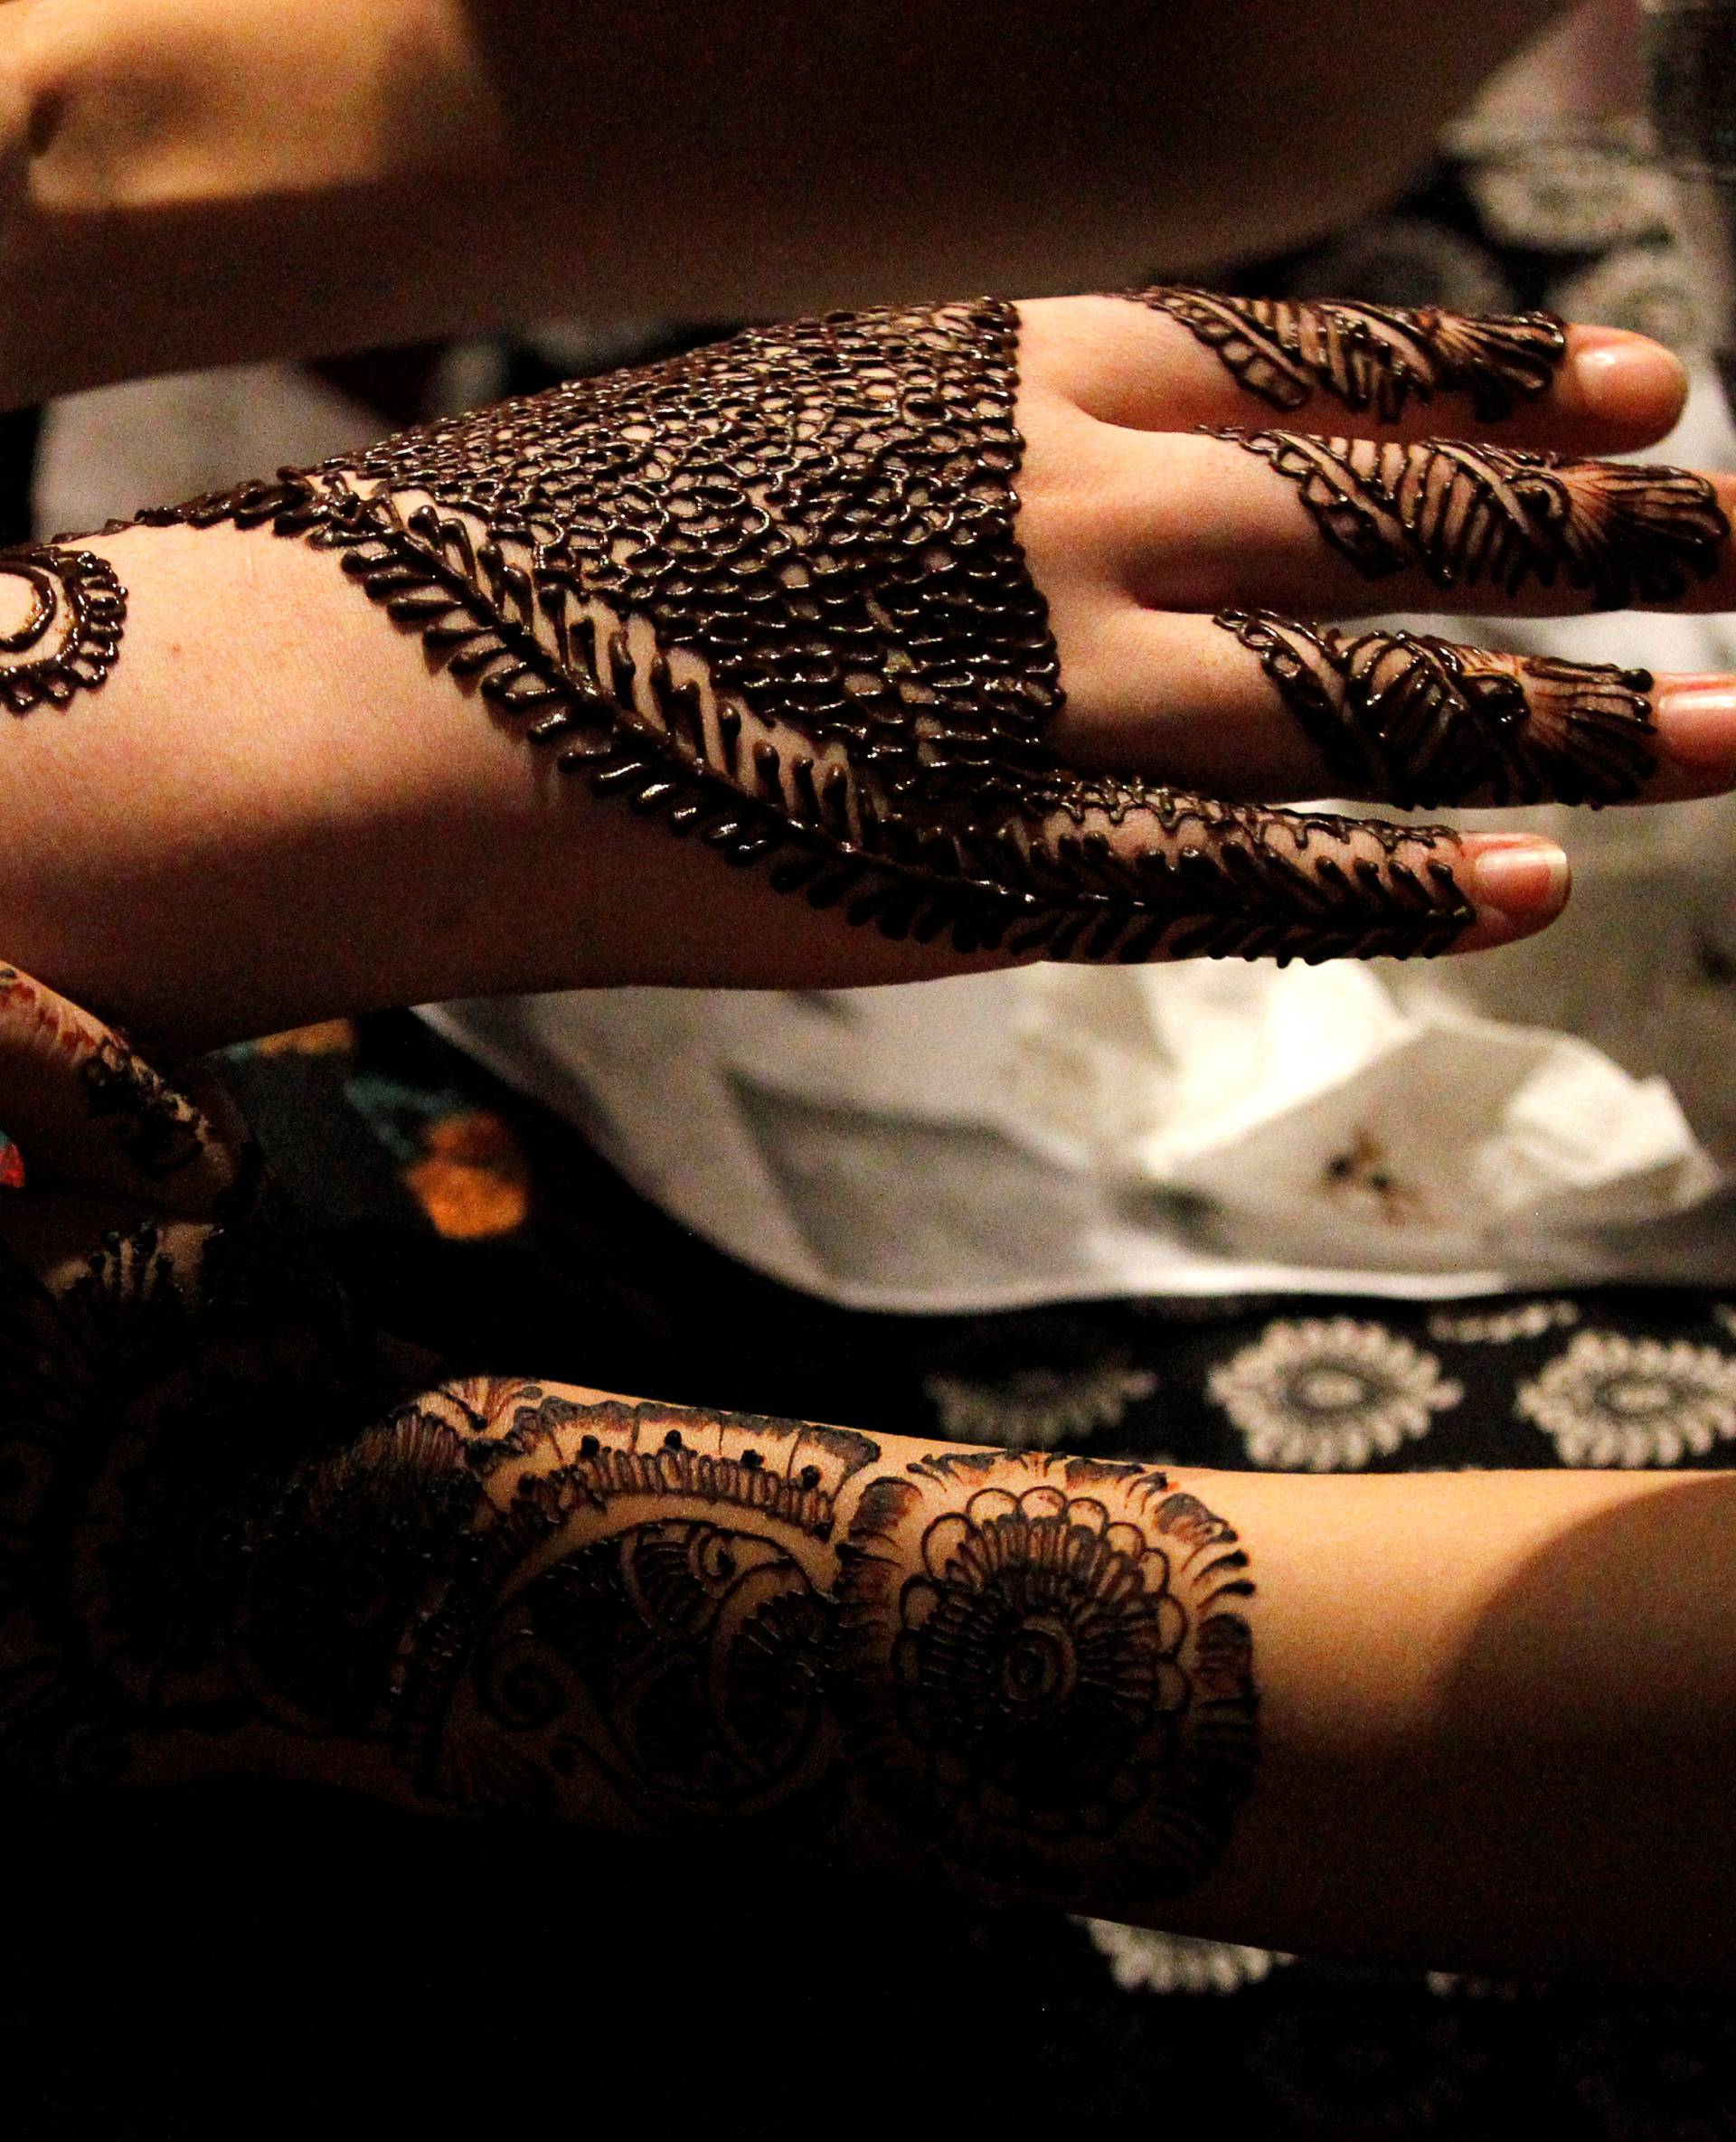 Women get Henna tattoos (Mehndi) ahead of Eid al-Fitr, which marks the end of the Muslim holy fasting month of Ramadan, at a market in Islamabad